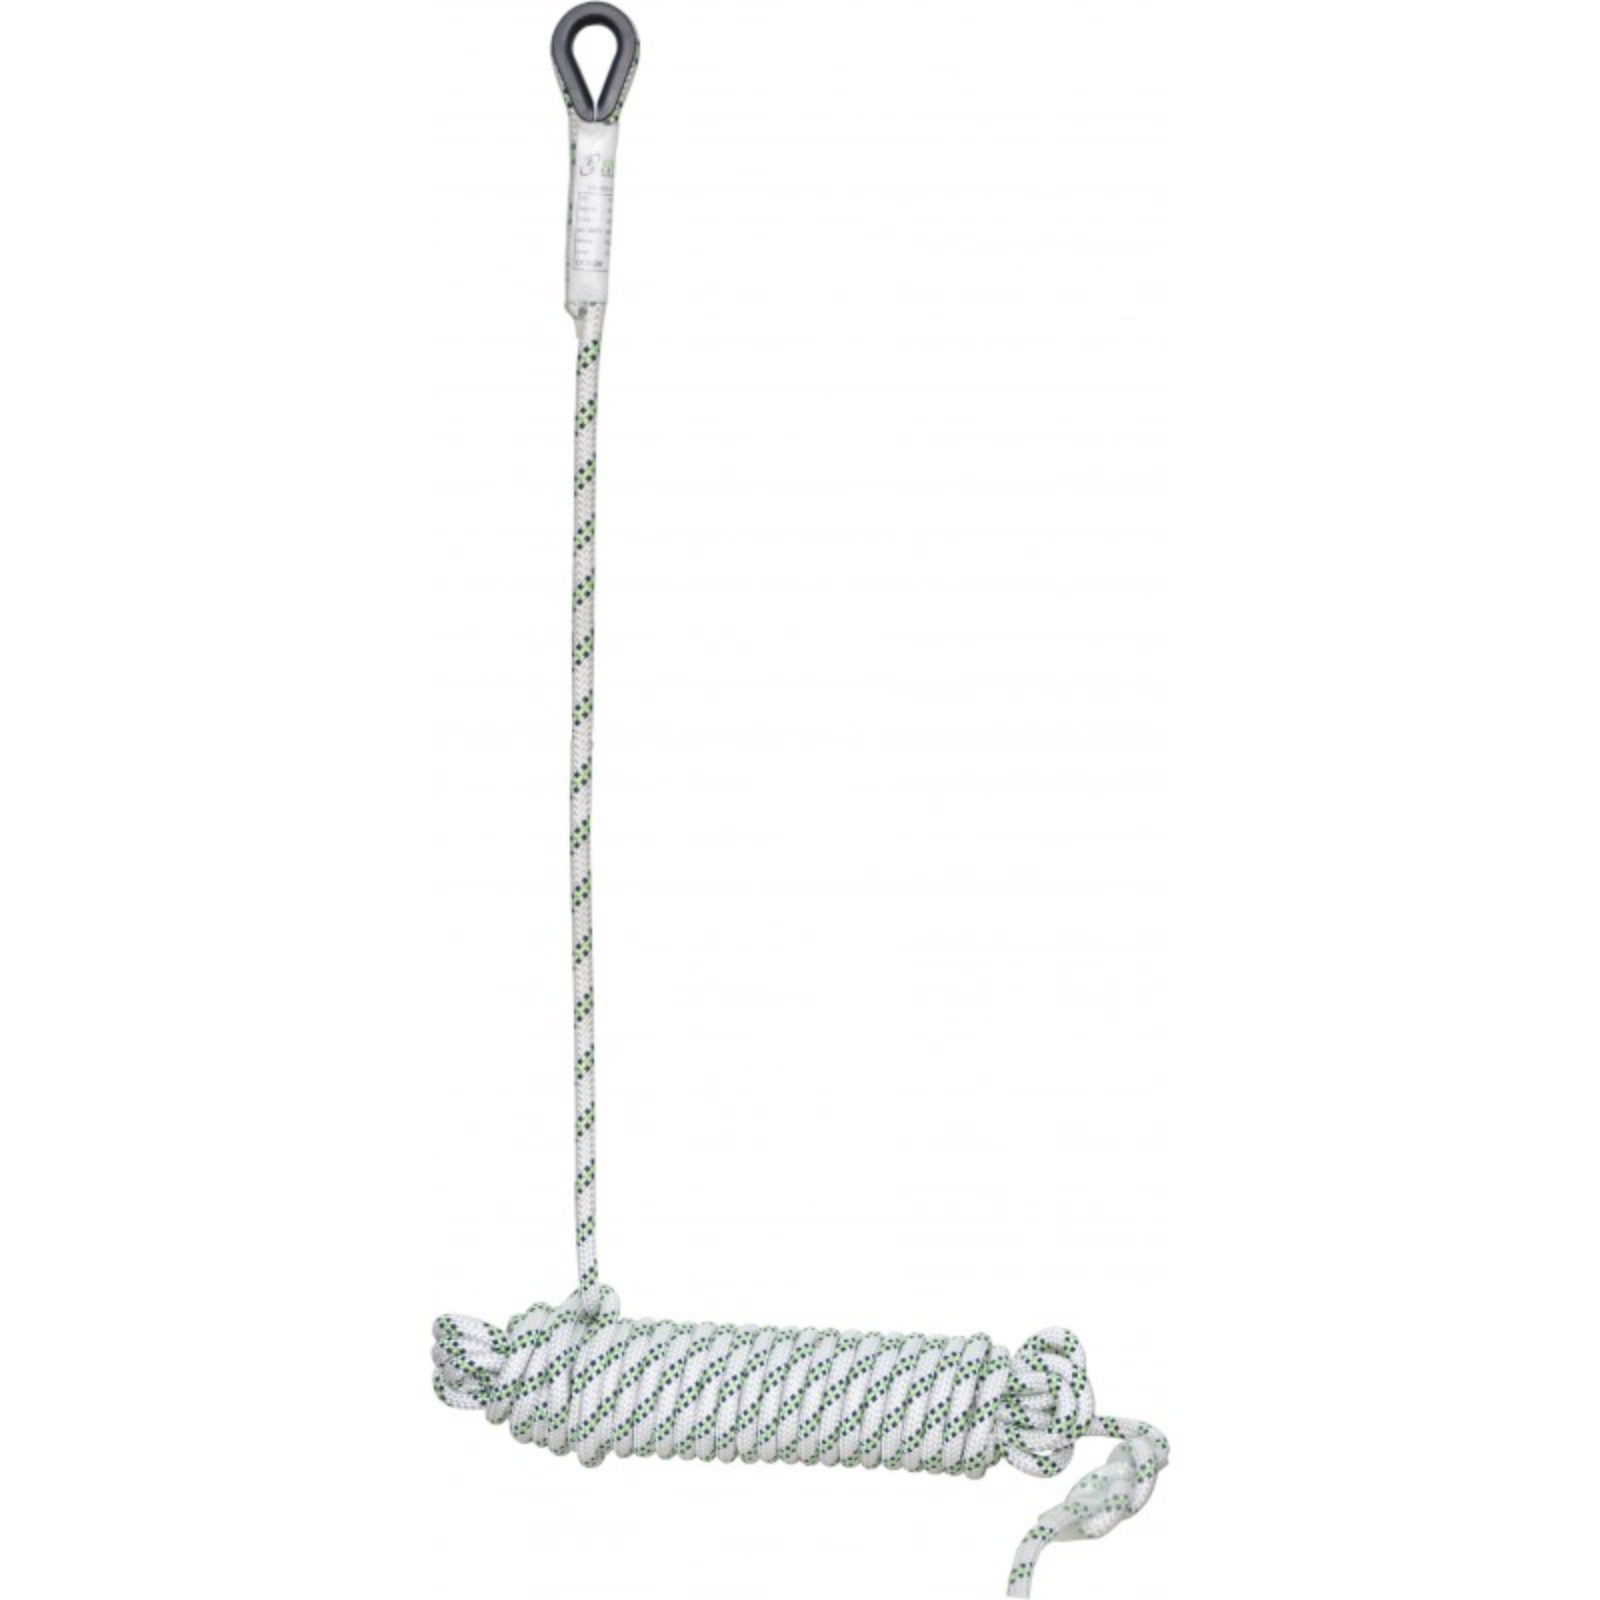 Kratos FA 20 103 Kernmantle Rope Anchor Line Only £49.50 excl vat From ...